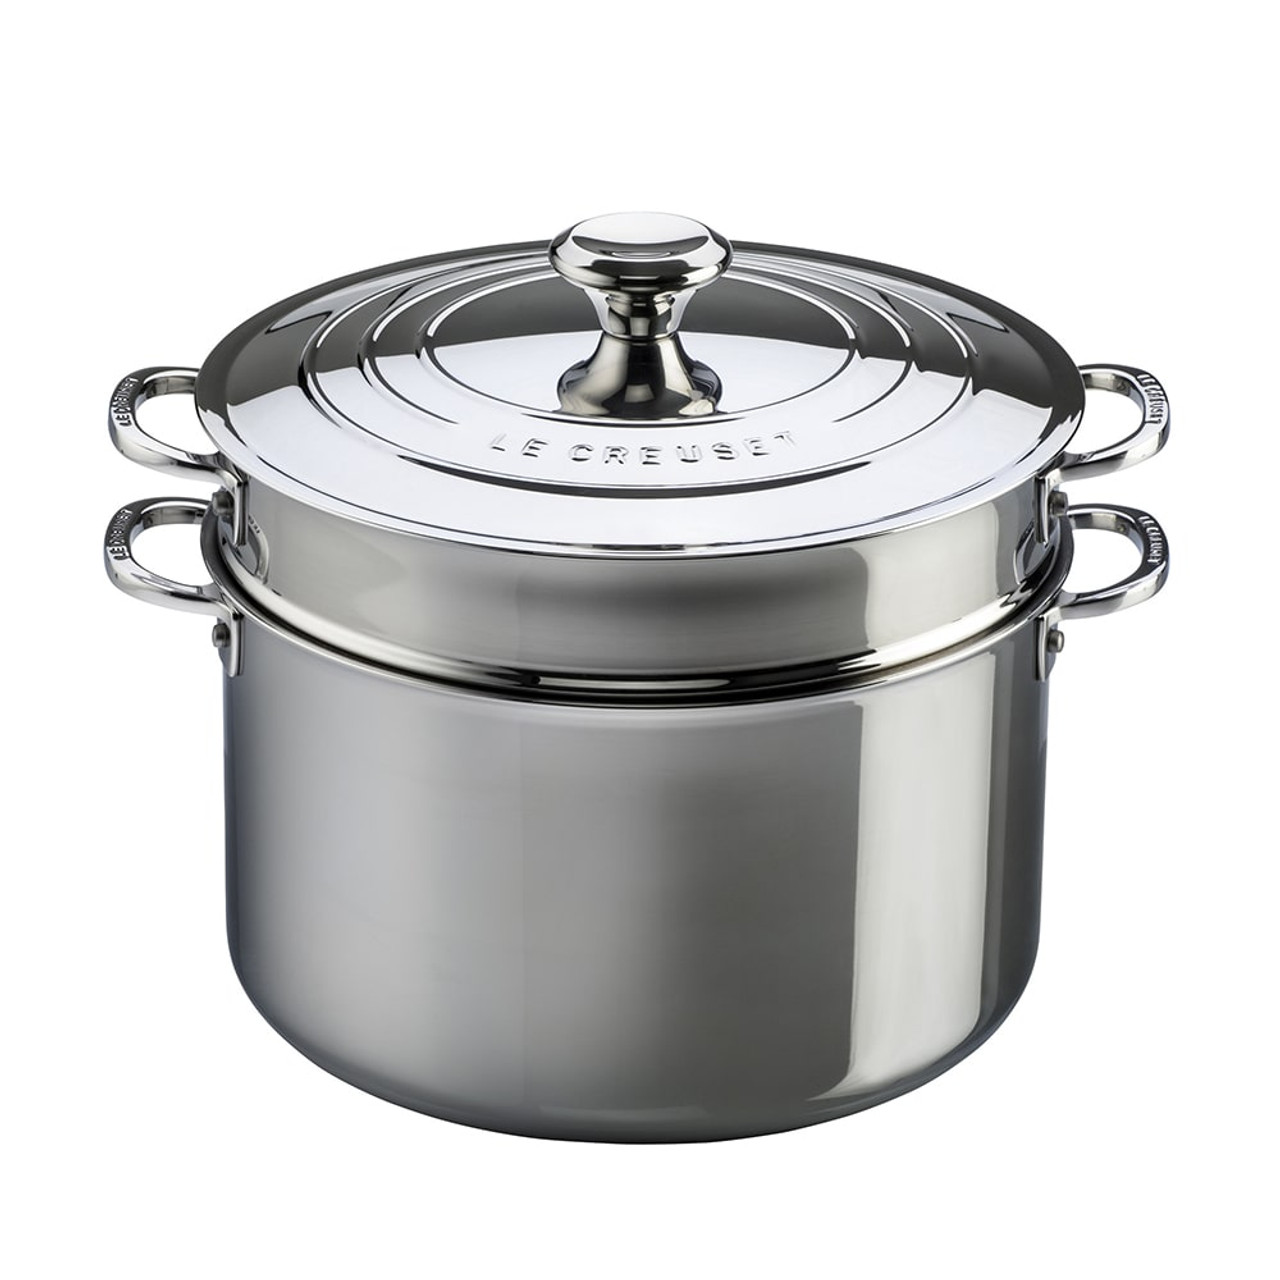 https://cdn11.bigcommerce.com/s-hccytny0od/images/stencil/1280x1280/products/3925/14293/le-creuset-stainless-steel-stockpot-with-colander__63331.1612875264.jpg?c=2?imbypass=on